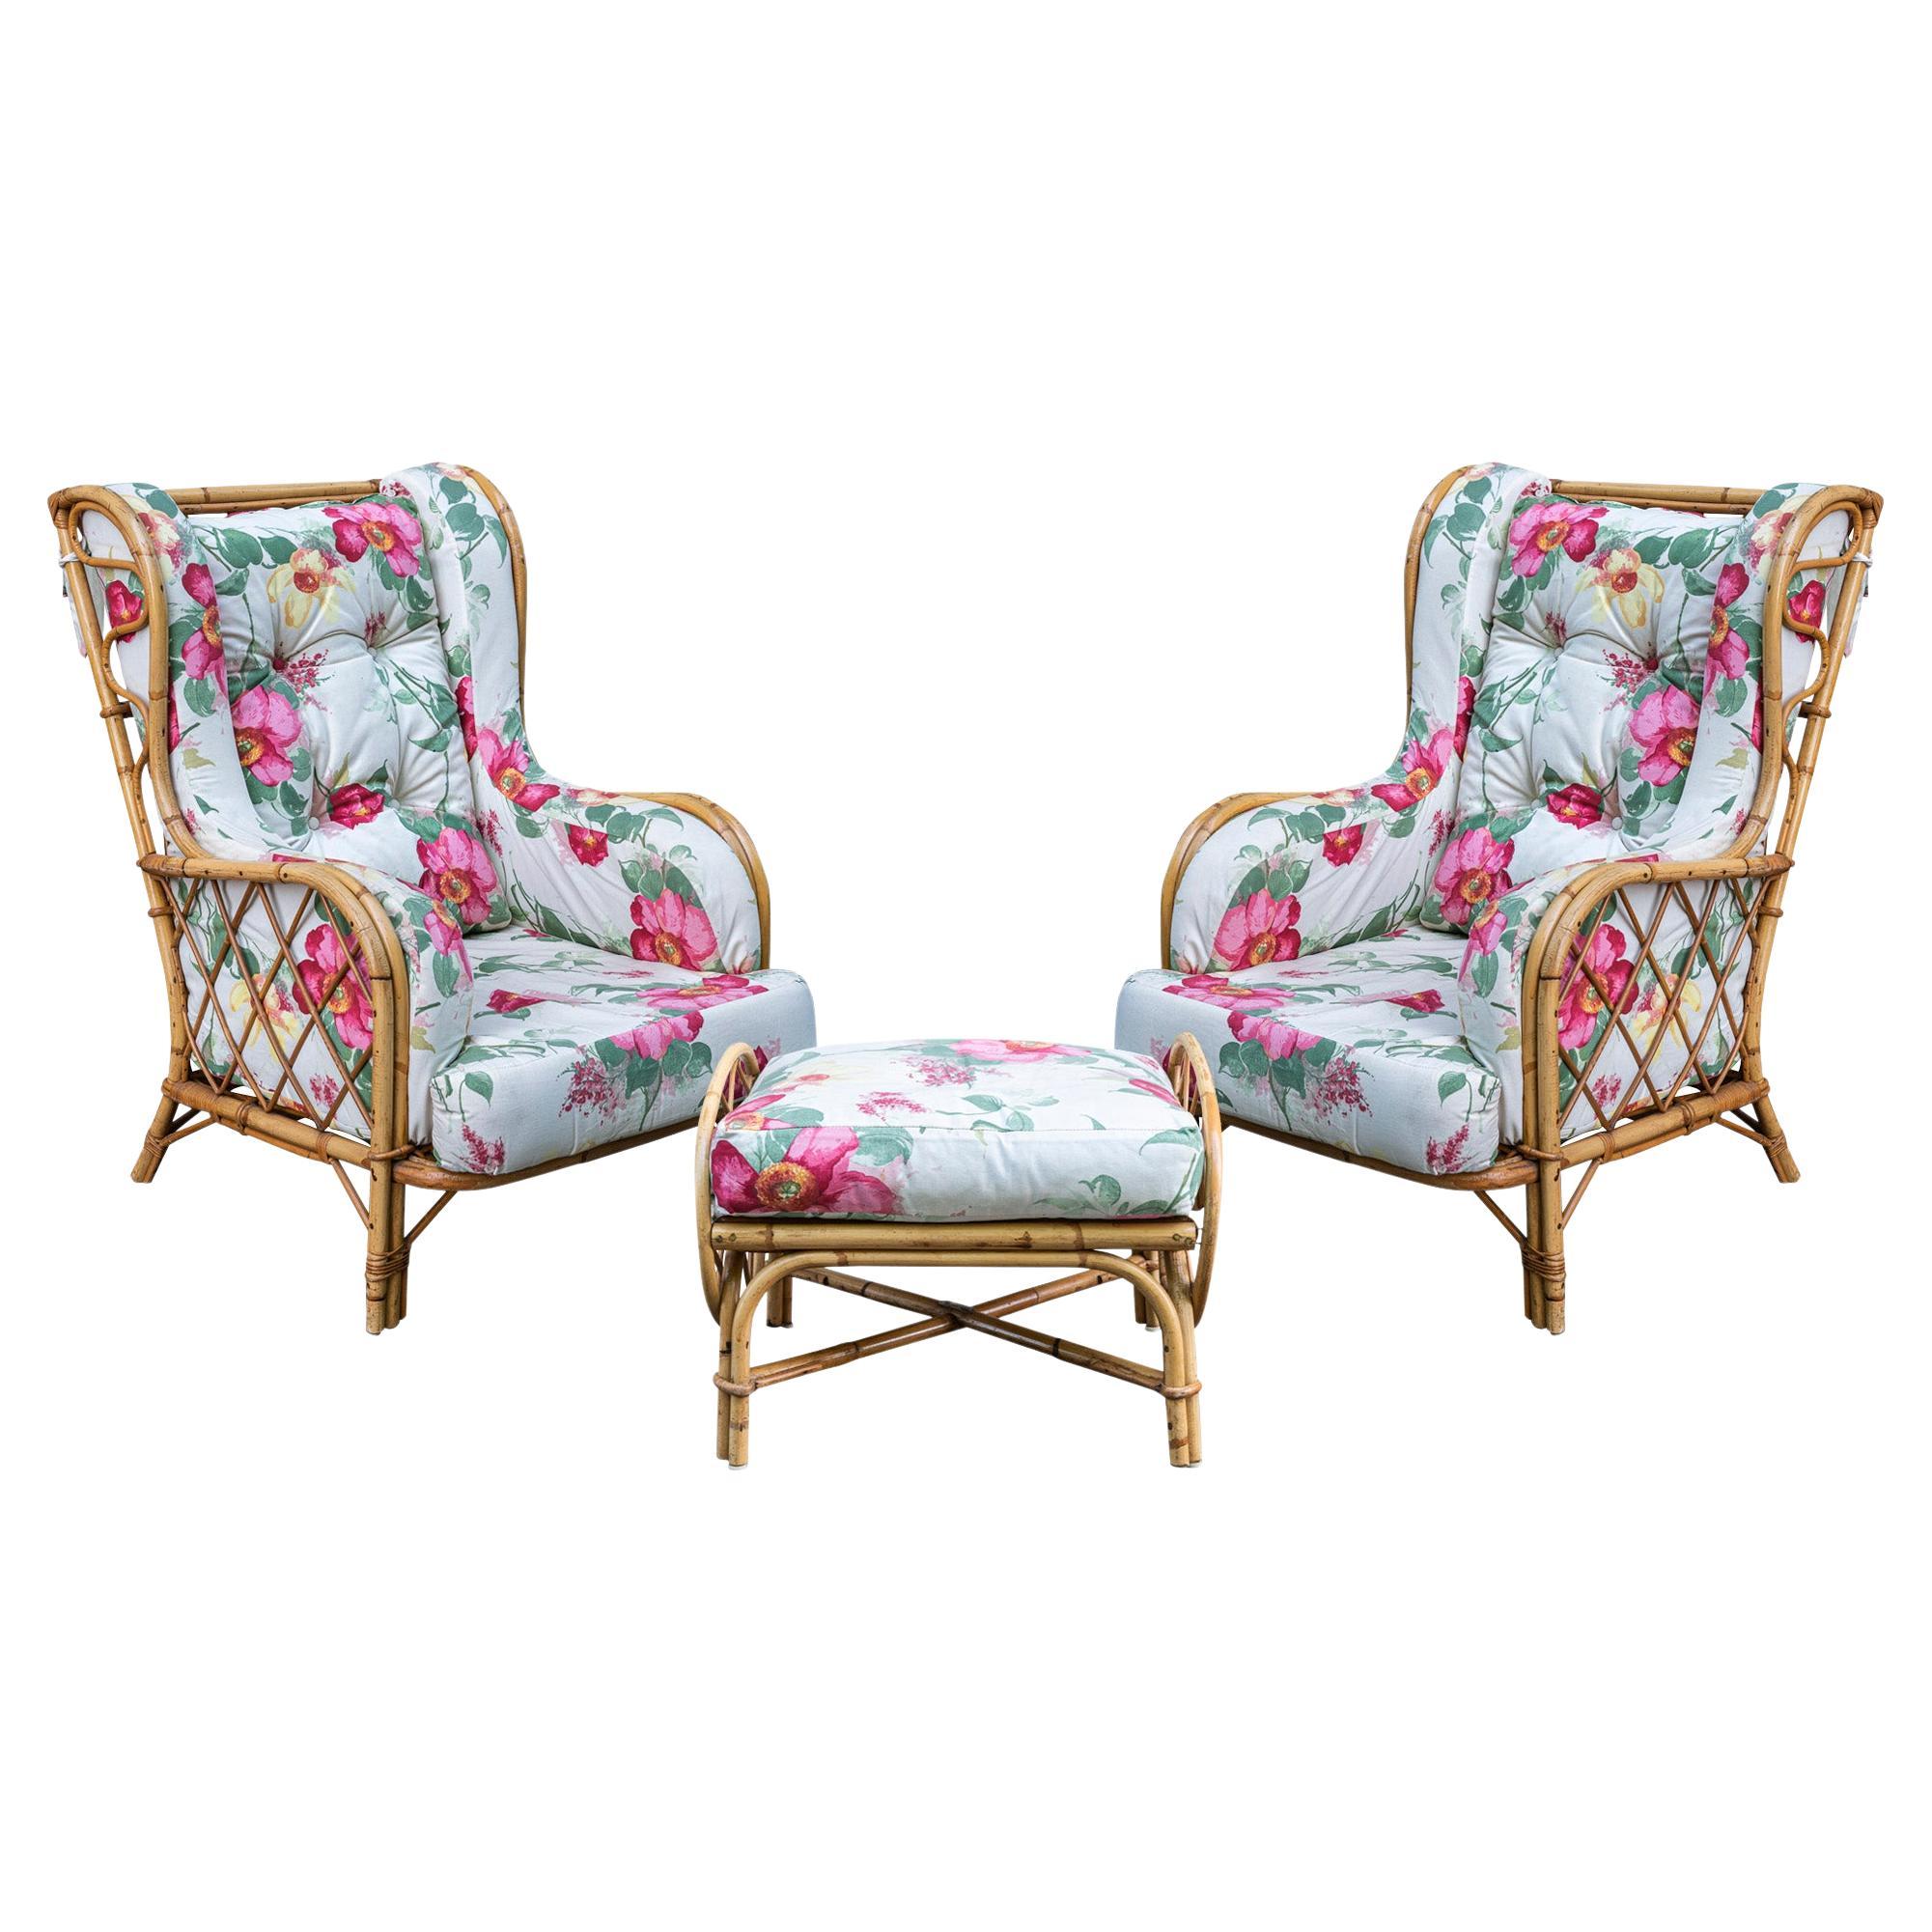 Audoux-Minet, Pair of Bergere Chairs and Ottoman, France, circa 1960